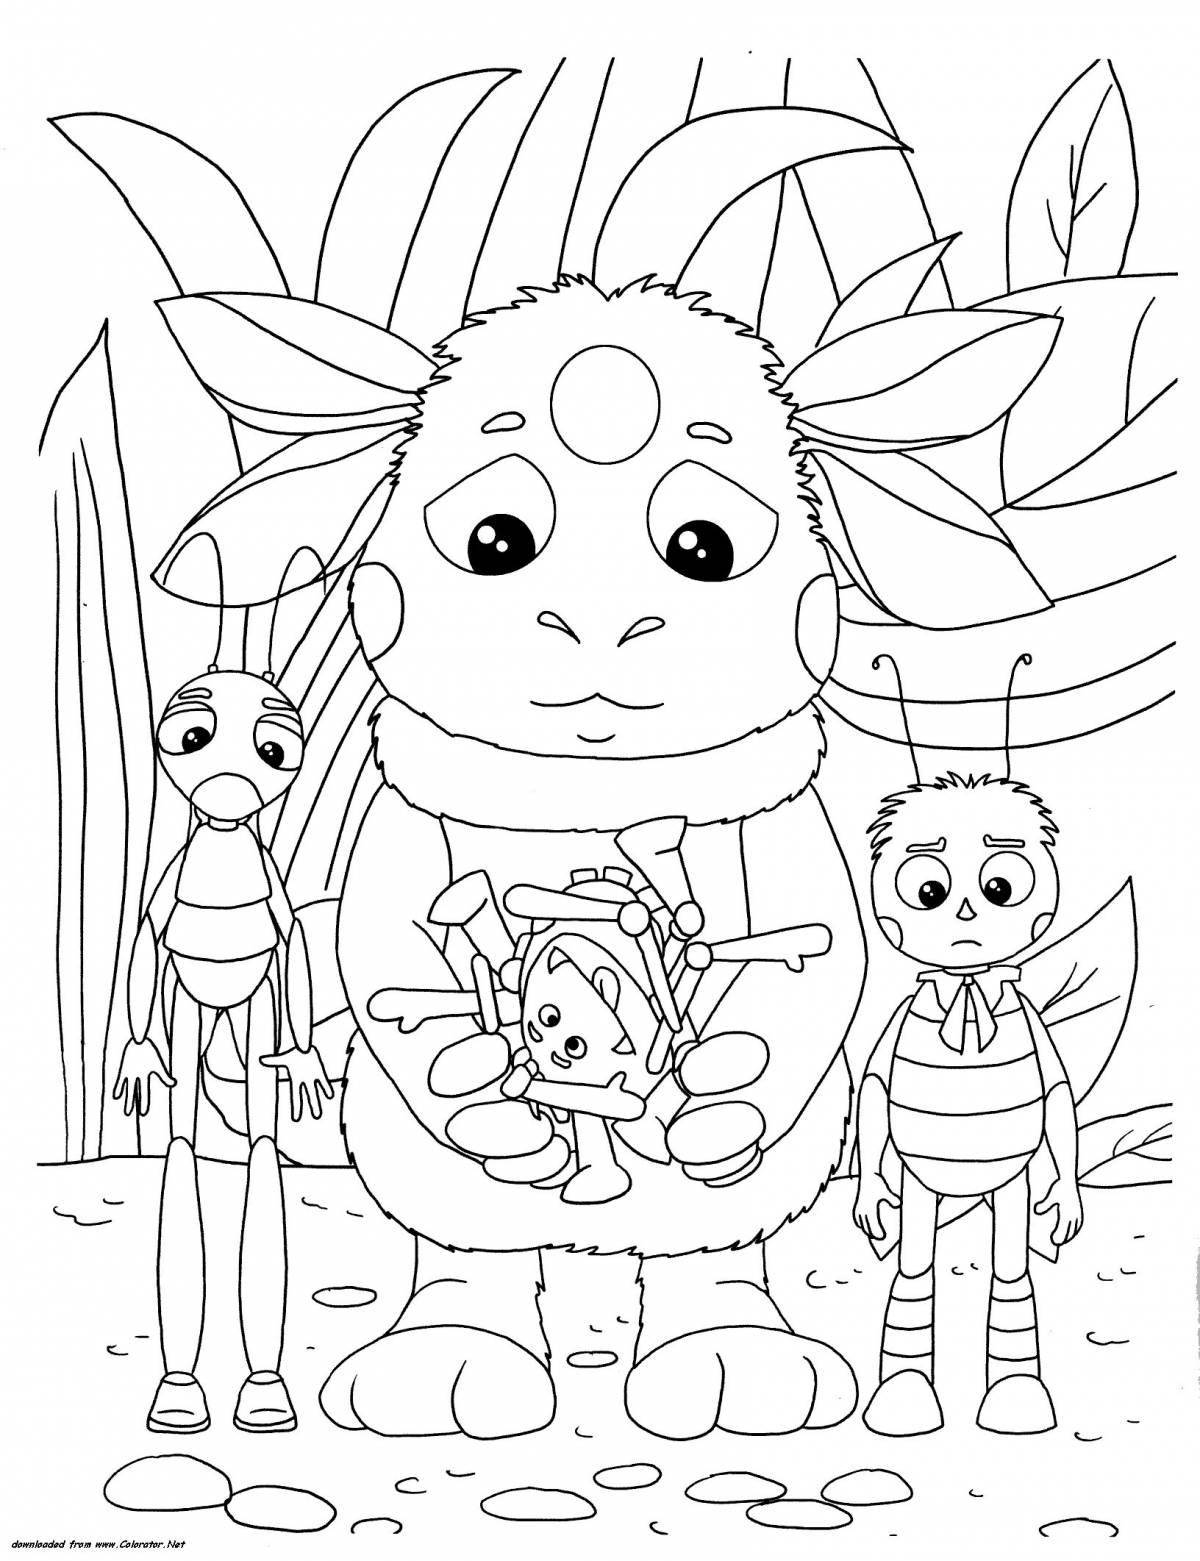 Coloring page captivating Luntik and friends